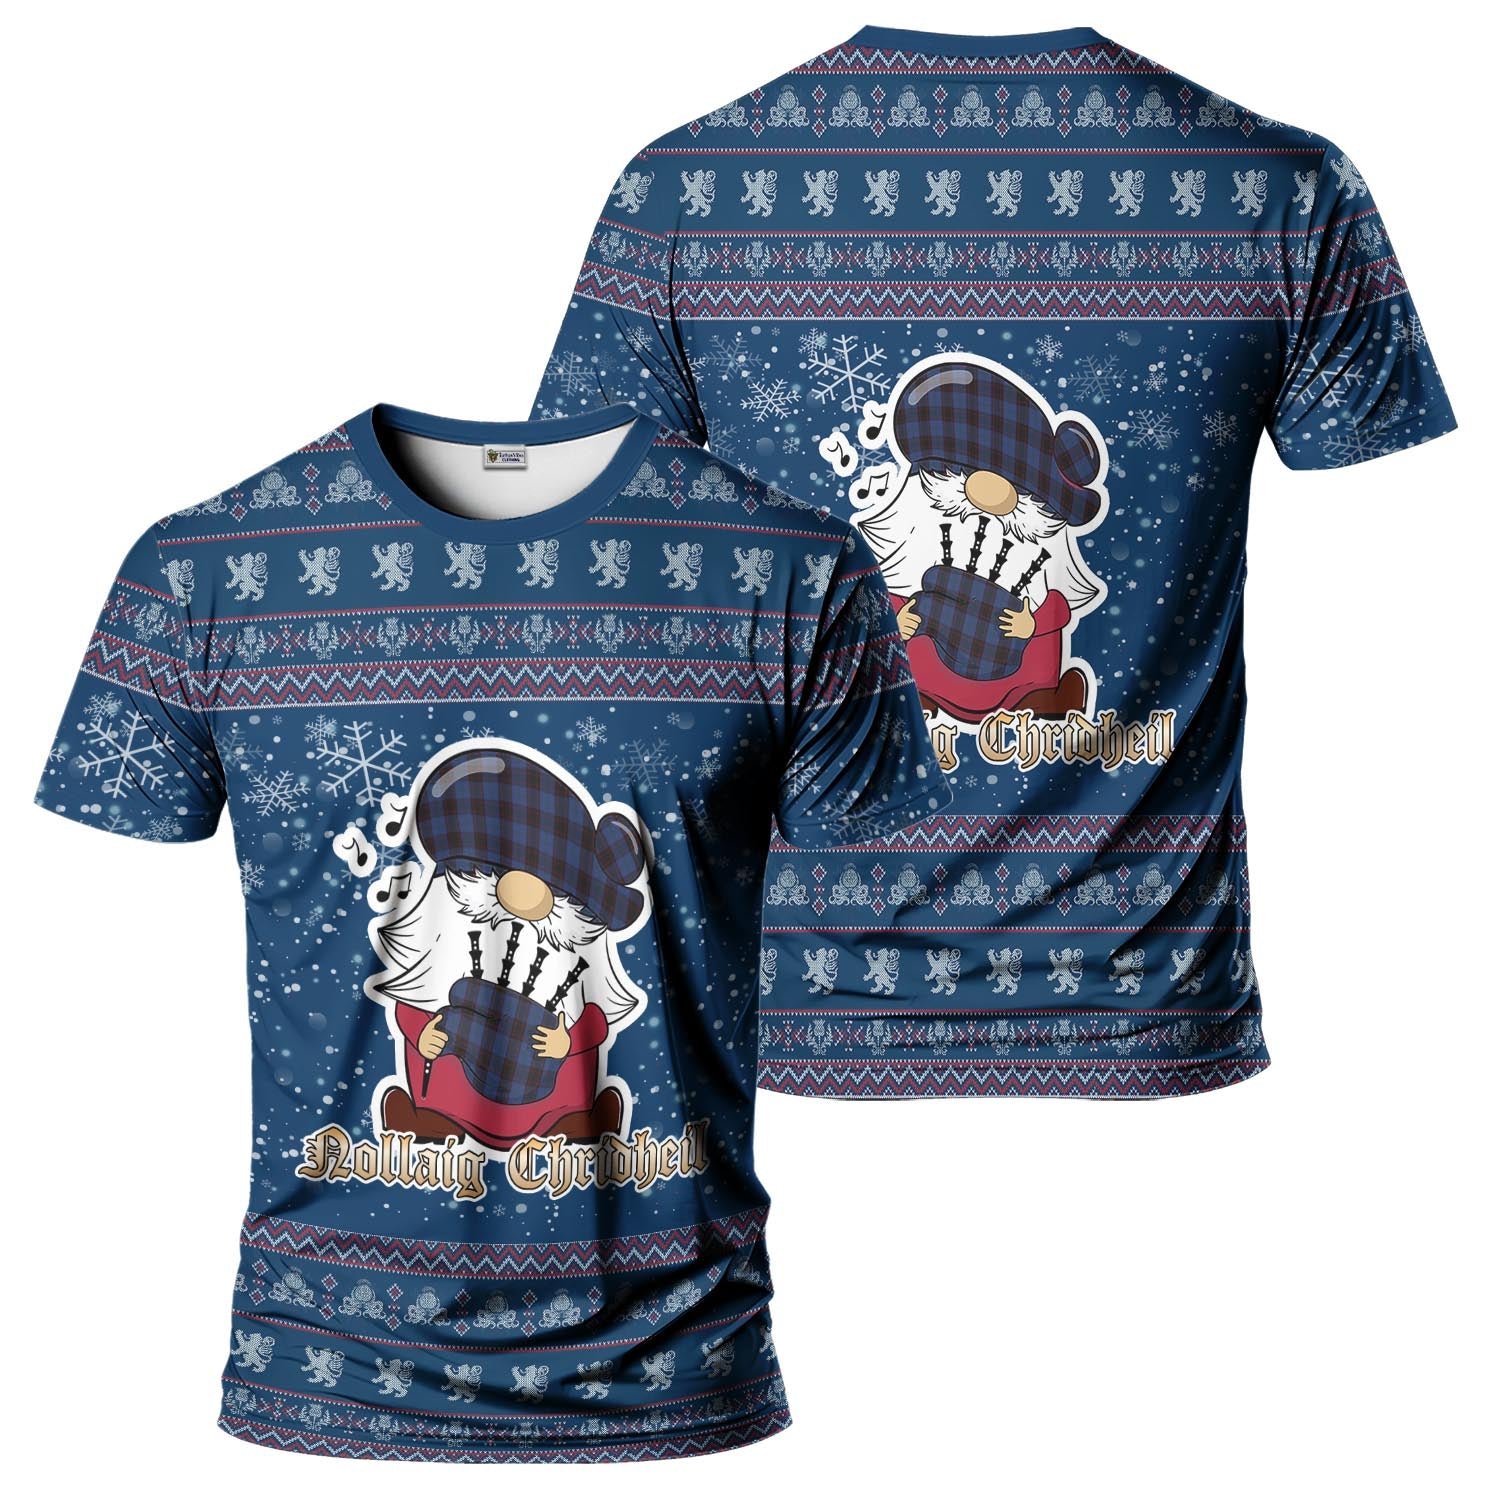 Home (Hume) Clan Christmas Family T-Shirt with Funny Gnome Playing Bagpipes Kid's Shirt Blue - Tartanvibesclothing